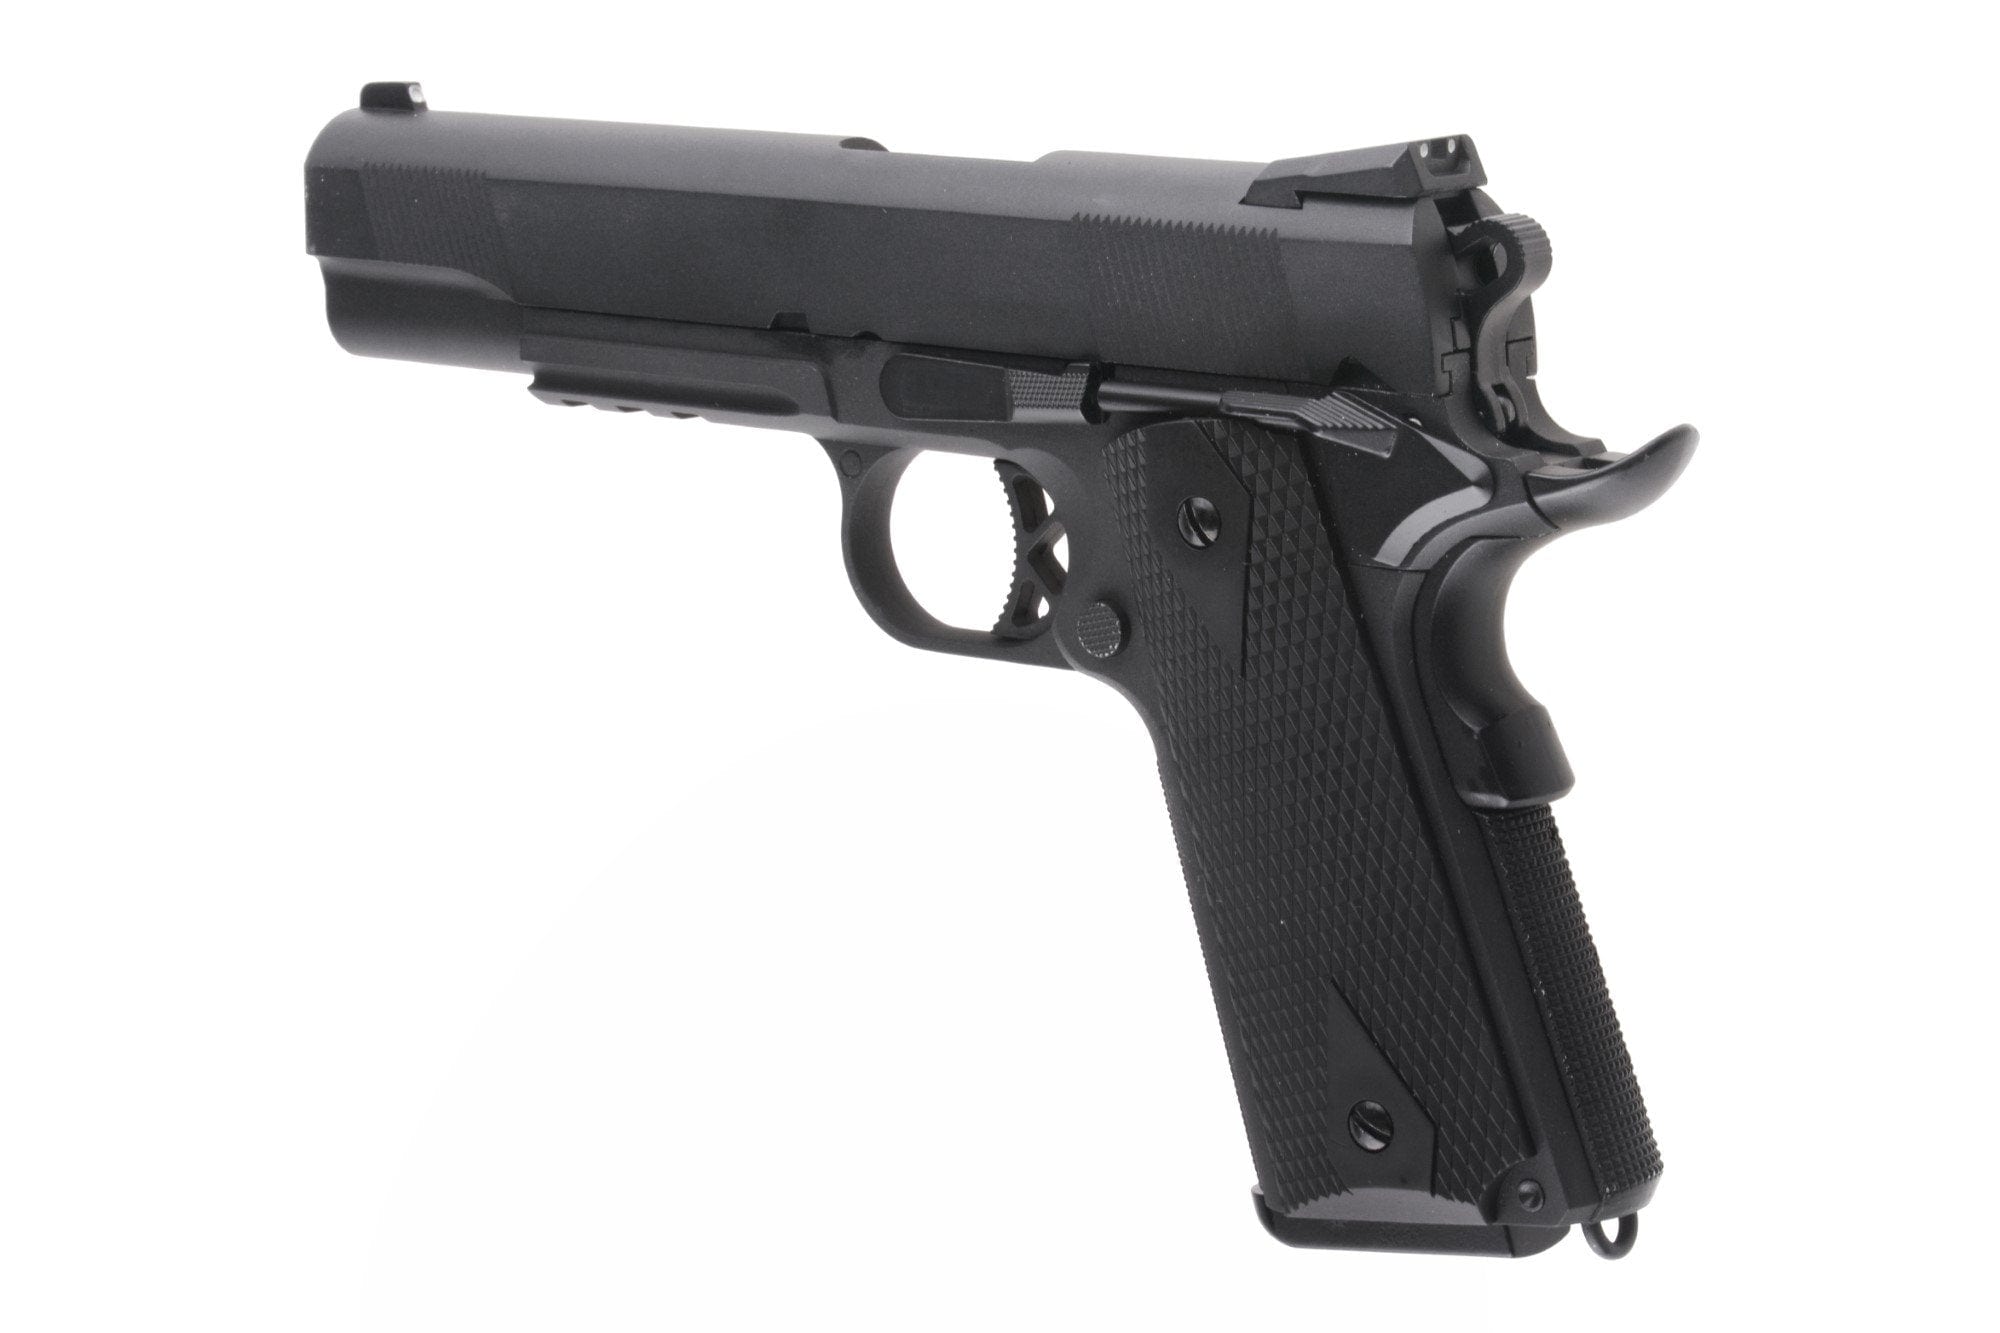 Tactical airsoft pistol Gas-powered 